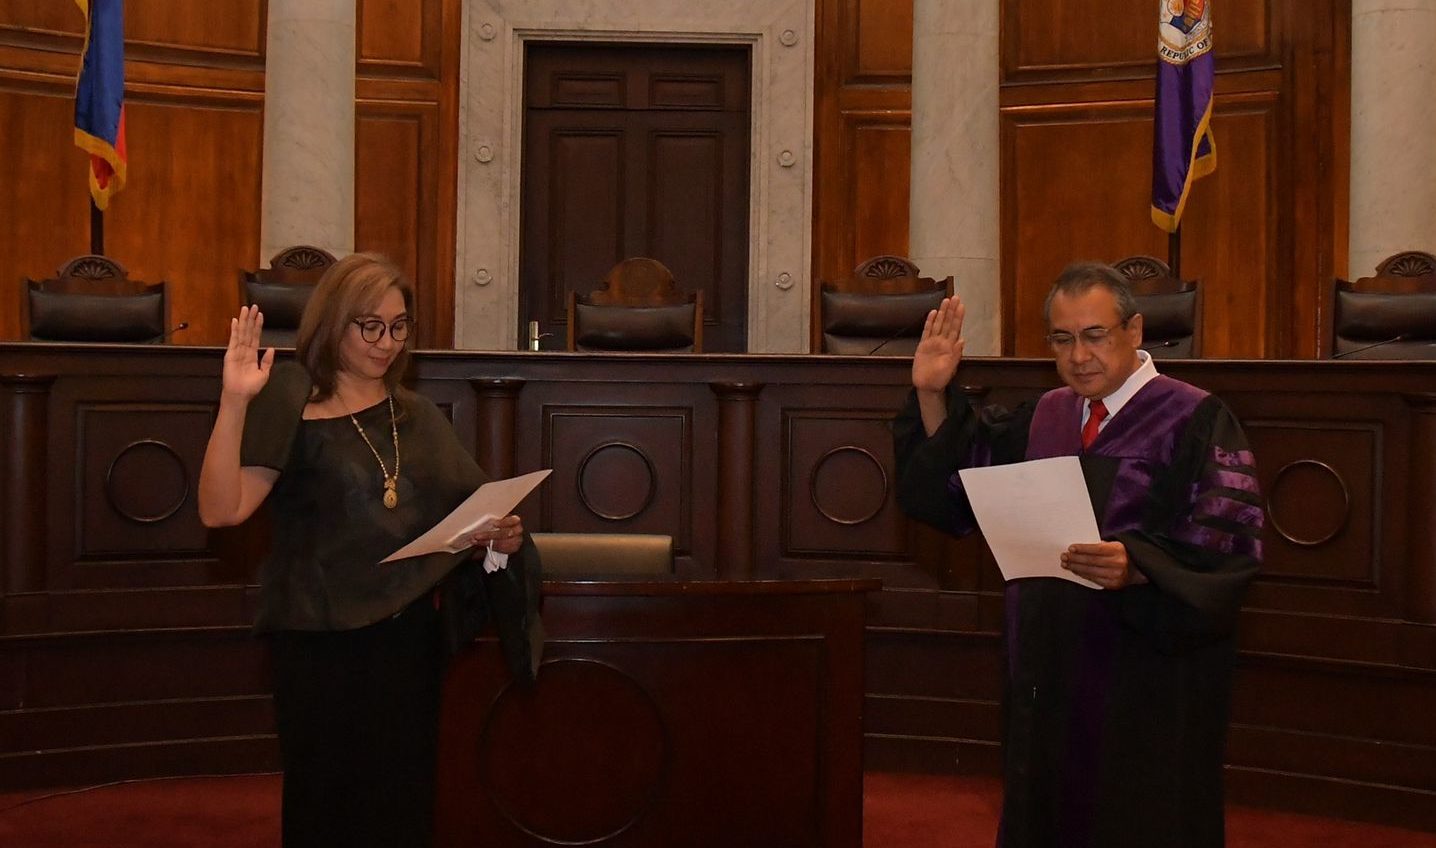 Justice Maria Filomena D. Singh took her oath before Chief Justice Alexander Gesmundo as the new SC Associate Justice